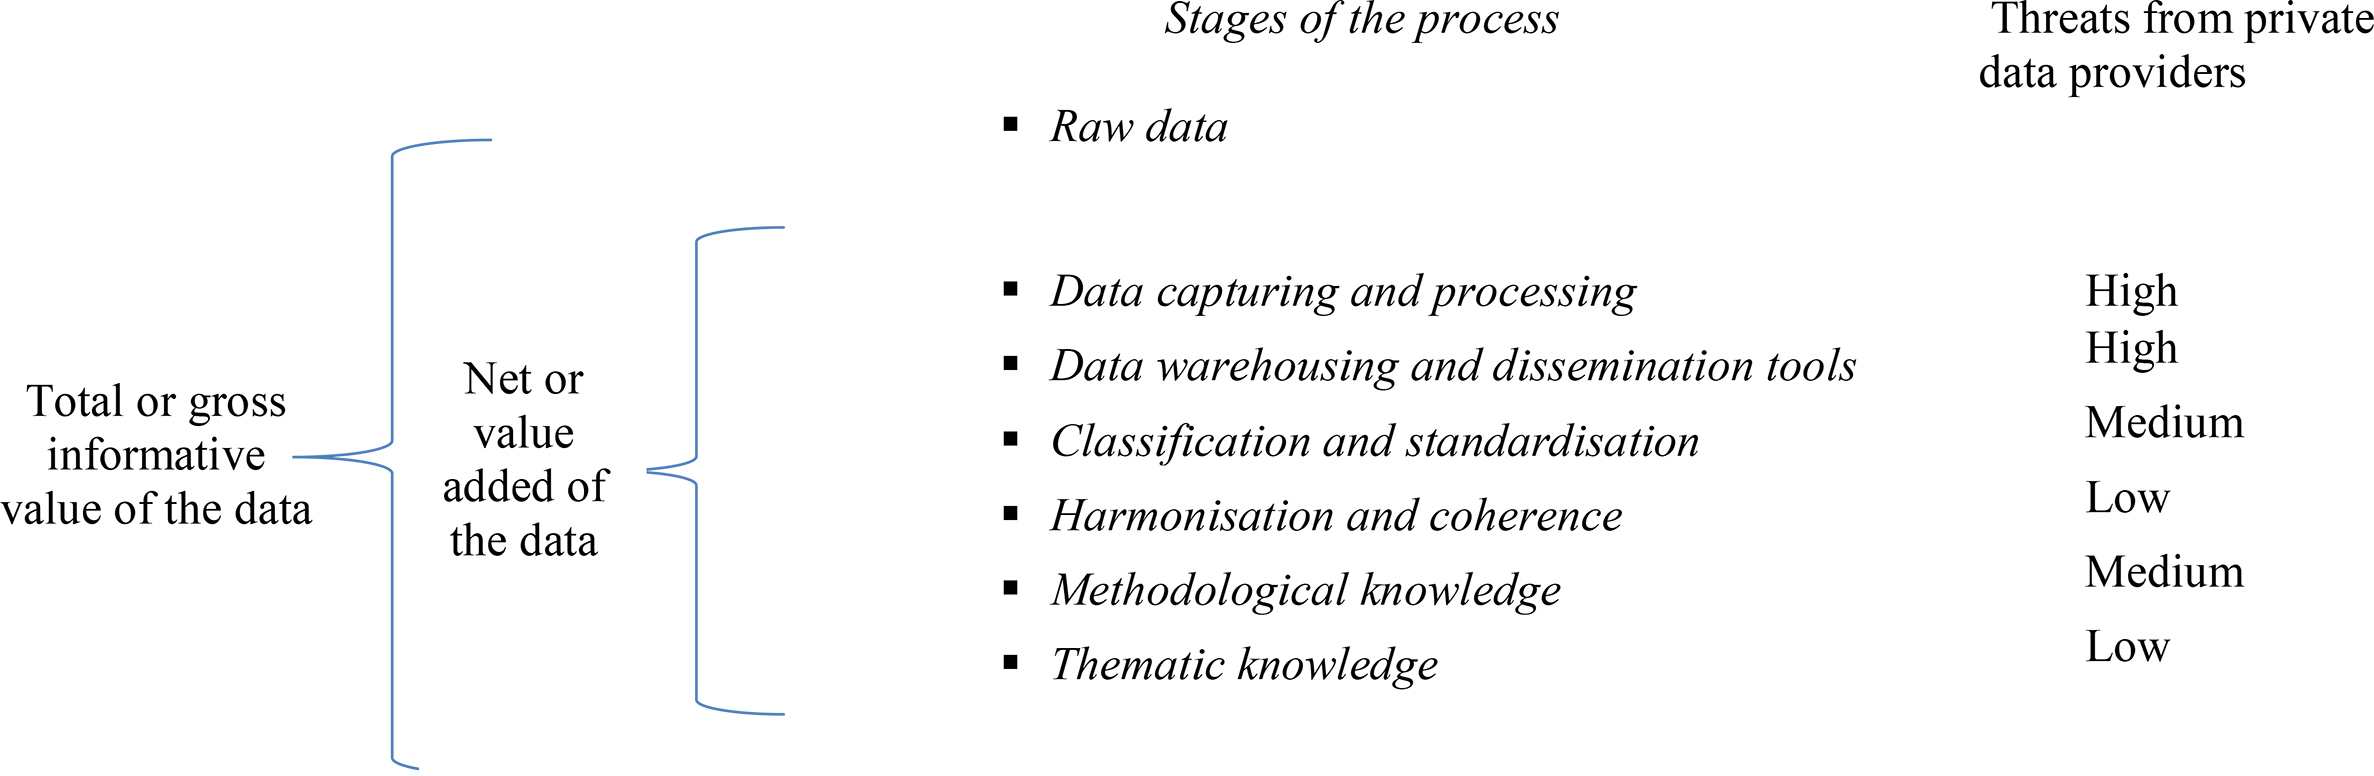 The impact on NSIs of changes in the business data arena. Source: Authors’ elaborations.